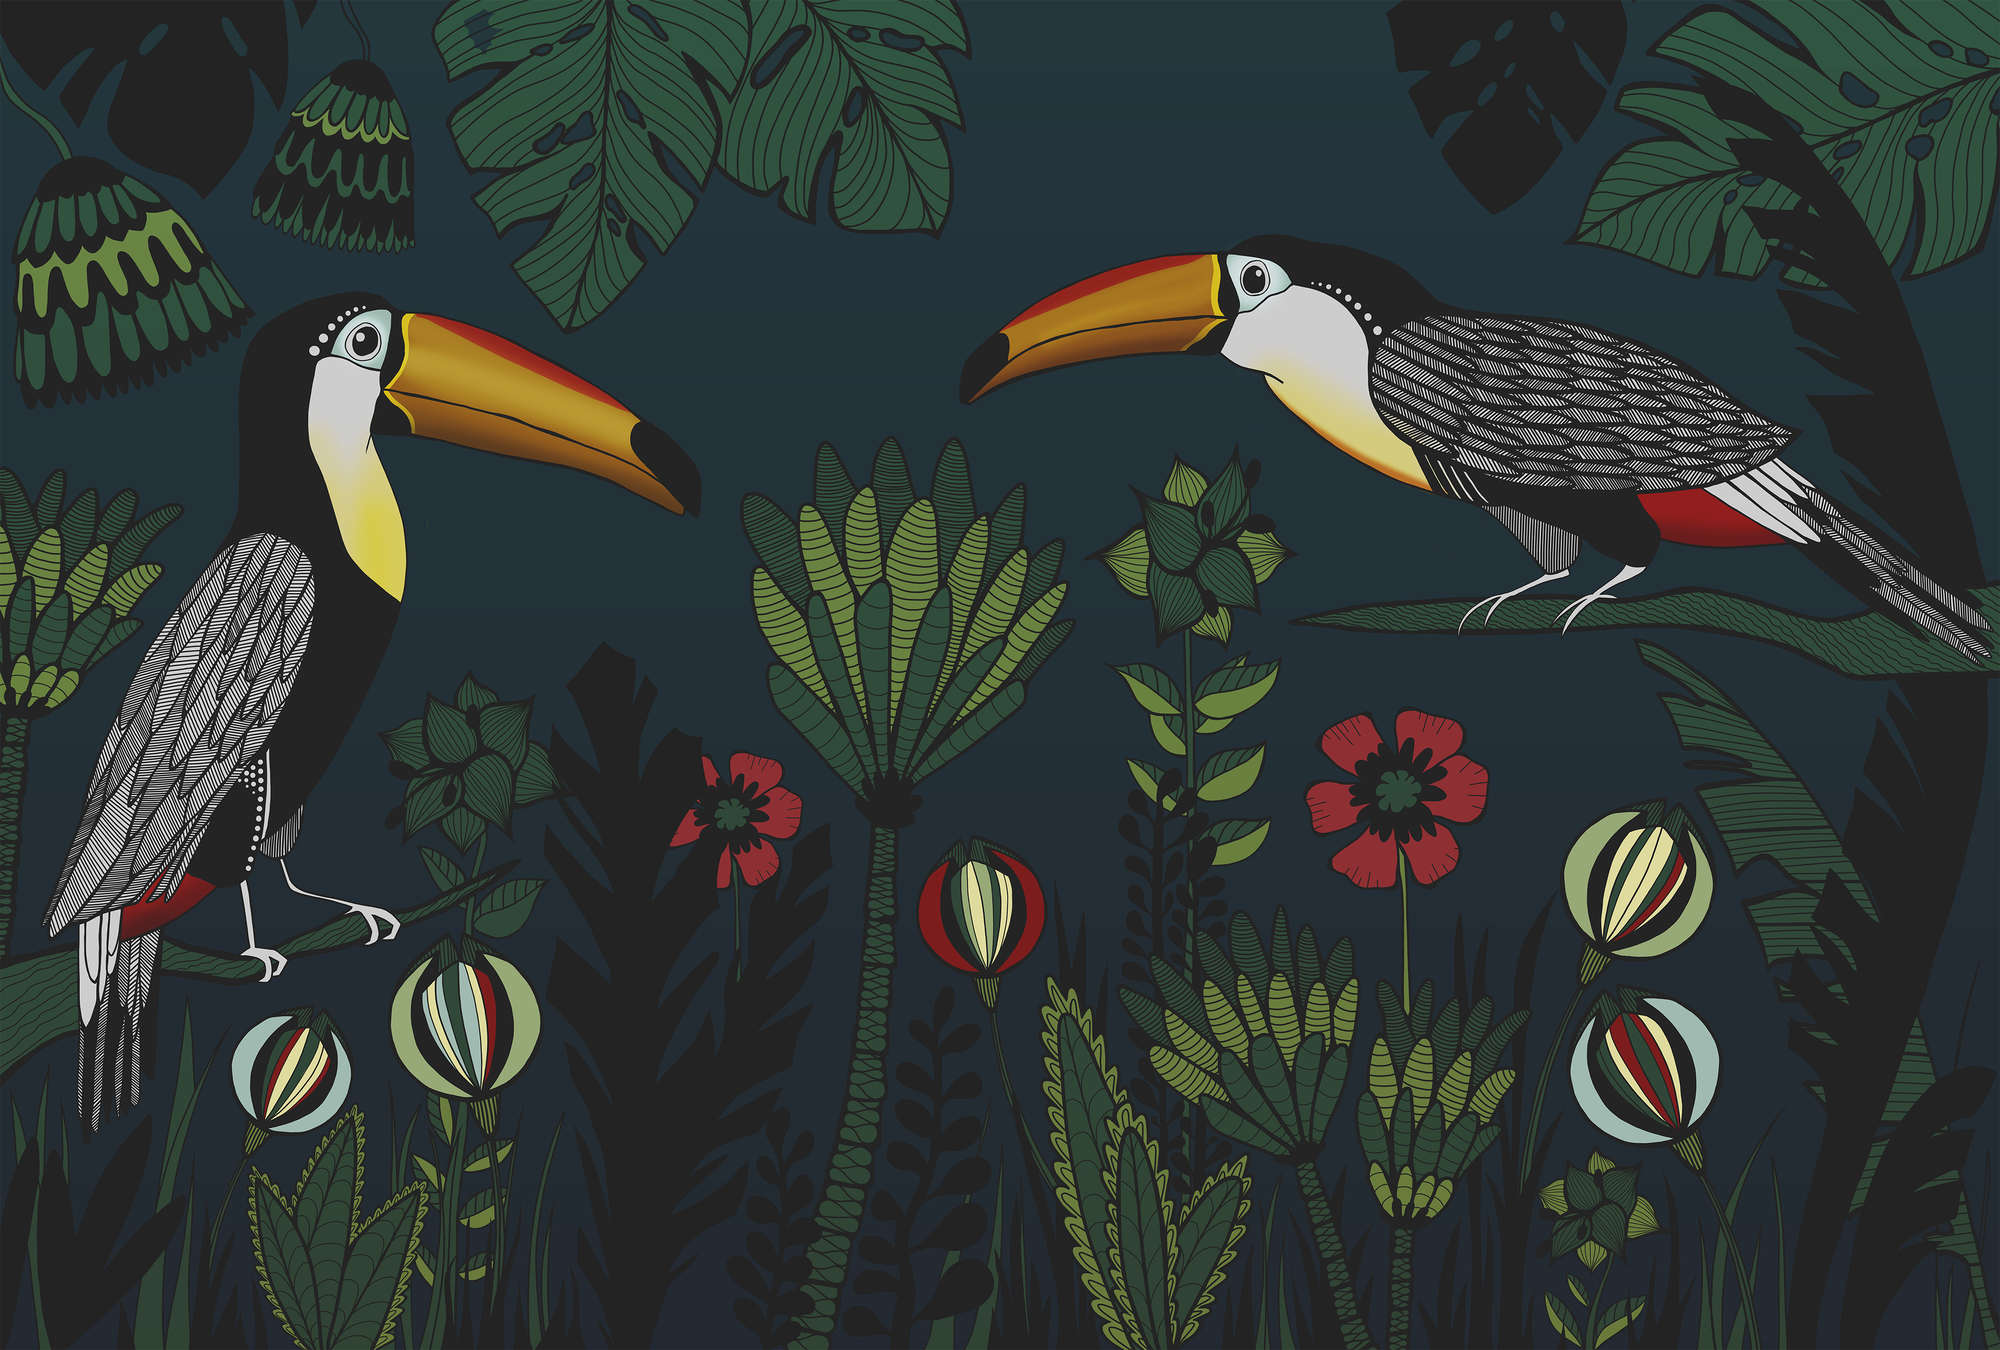             Photo wallpaper jungle pattern with birds in drawing style
        